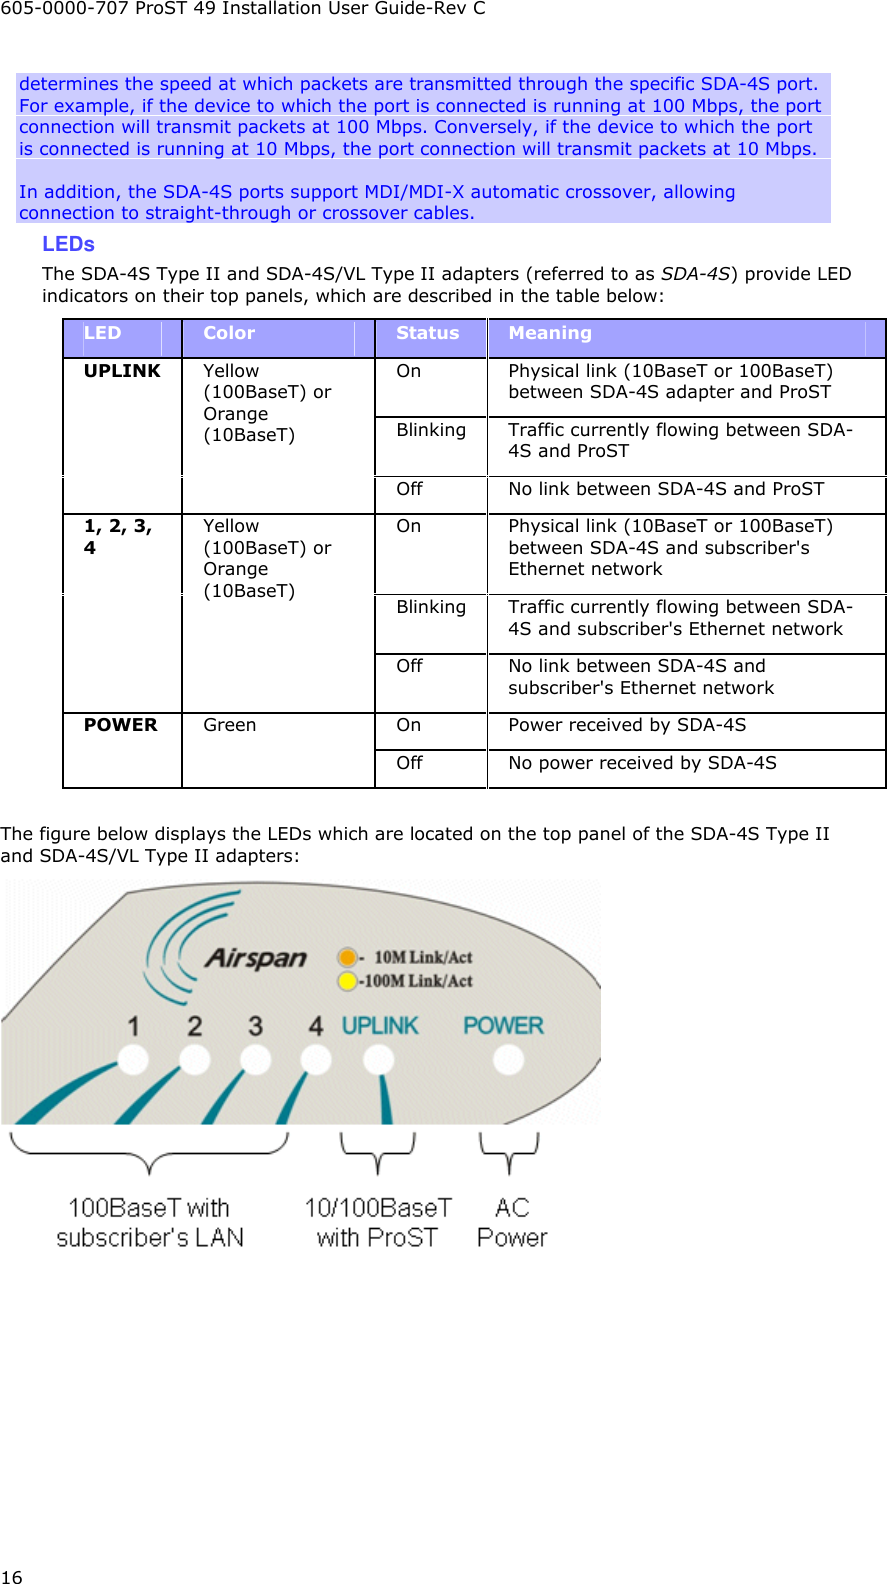 605-0000-707 ProST 49 Installation User Guide-Rev C 16 determines the speed at which packets are transmitted through the specific SDA-4S port. For example, if the device to which the port is connected is running at 100 Mbps, the port connection will transmit packets at 100 Mbps. Conversely, if the device to which the port is connected is running at 10 Mbps, the port connection will transmit packets at 10 Mbps.   In addition, the SDA-4S ports support MDI/MDI-X automatic crossover, allowing connection to straight-through or crossover cables. LEDs The SDA-4S Type II and SDA-4S/VL Type II adapters (referred to as SDA-4S) provide LED indicators on their top panels, which are described in the table below: LED  Color  Status  Meaning On  Physical link (10BaseT or 100BaseT) between SDA-4S adapter and ProST Blinking  Traffic currently flowing between SDA-4S and ProST UPLINK  Yellow (100BaseT) or Orange (10BaseT) Off  No link between SDA-4S and ProST On  Physical link (10BaseT or 100BaseT) between SDA-4S and subscriber&apos;s Ethernet network Blinking  Traffic currently flowing between SDA-4S and subscriber&apos;s Ethernet network 1, 2, 3, 4 Yellow (100BaseT) or Orange (10BaseT) Off  No link between SDA-4S and subscriber&apos;s Ethernet network On  Power received by SDA-4S POWER  Green Off  No power received by SDA-4S  The figure below displays the LEDs which are located on the top panel of the SDA-4S Type II and SDA-4S/VL Type II adapters:   